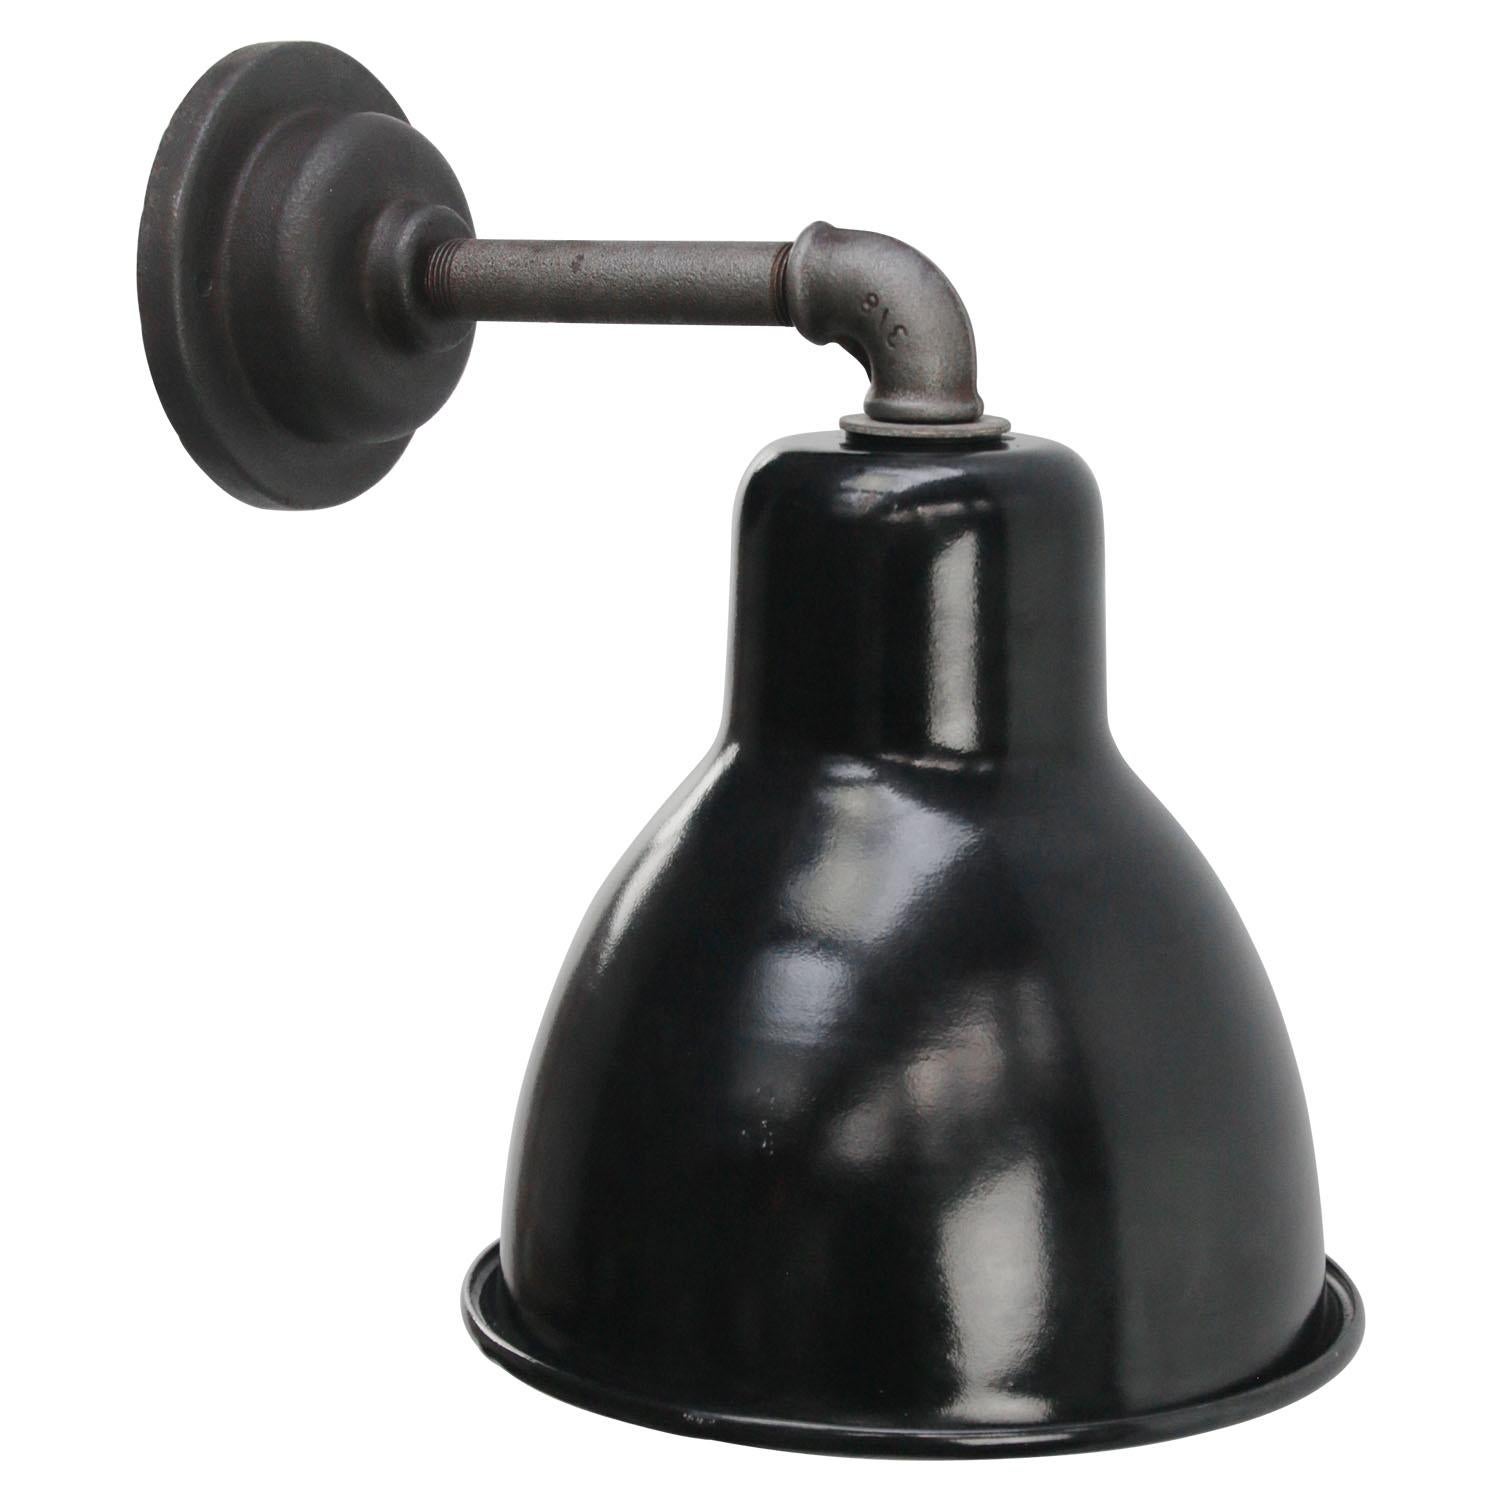 Factory wall light.
Black enamel shade, cast iron arm and wall plate

diameter cast iron wall piece: 10.5 cm / 4” - 2 holes to secure

Weight: 1.60 kg / 3.5 lb

Priced per individual item. All lamps have been made suitable by international standards